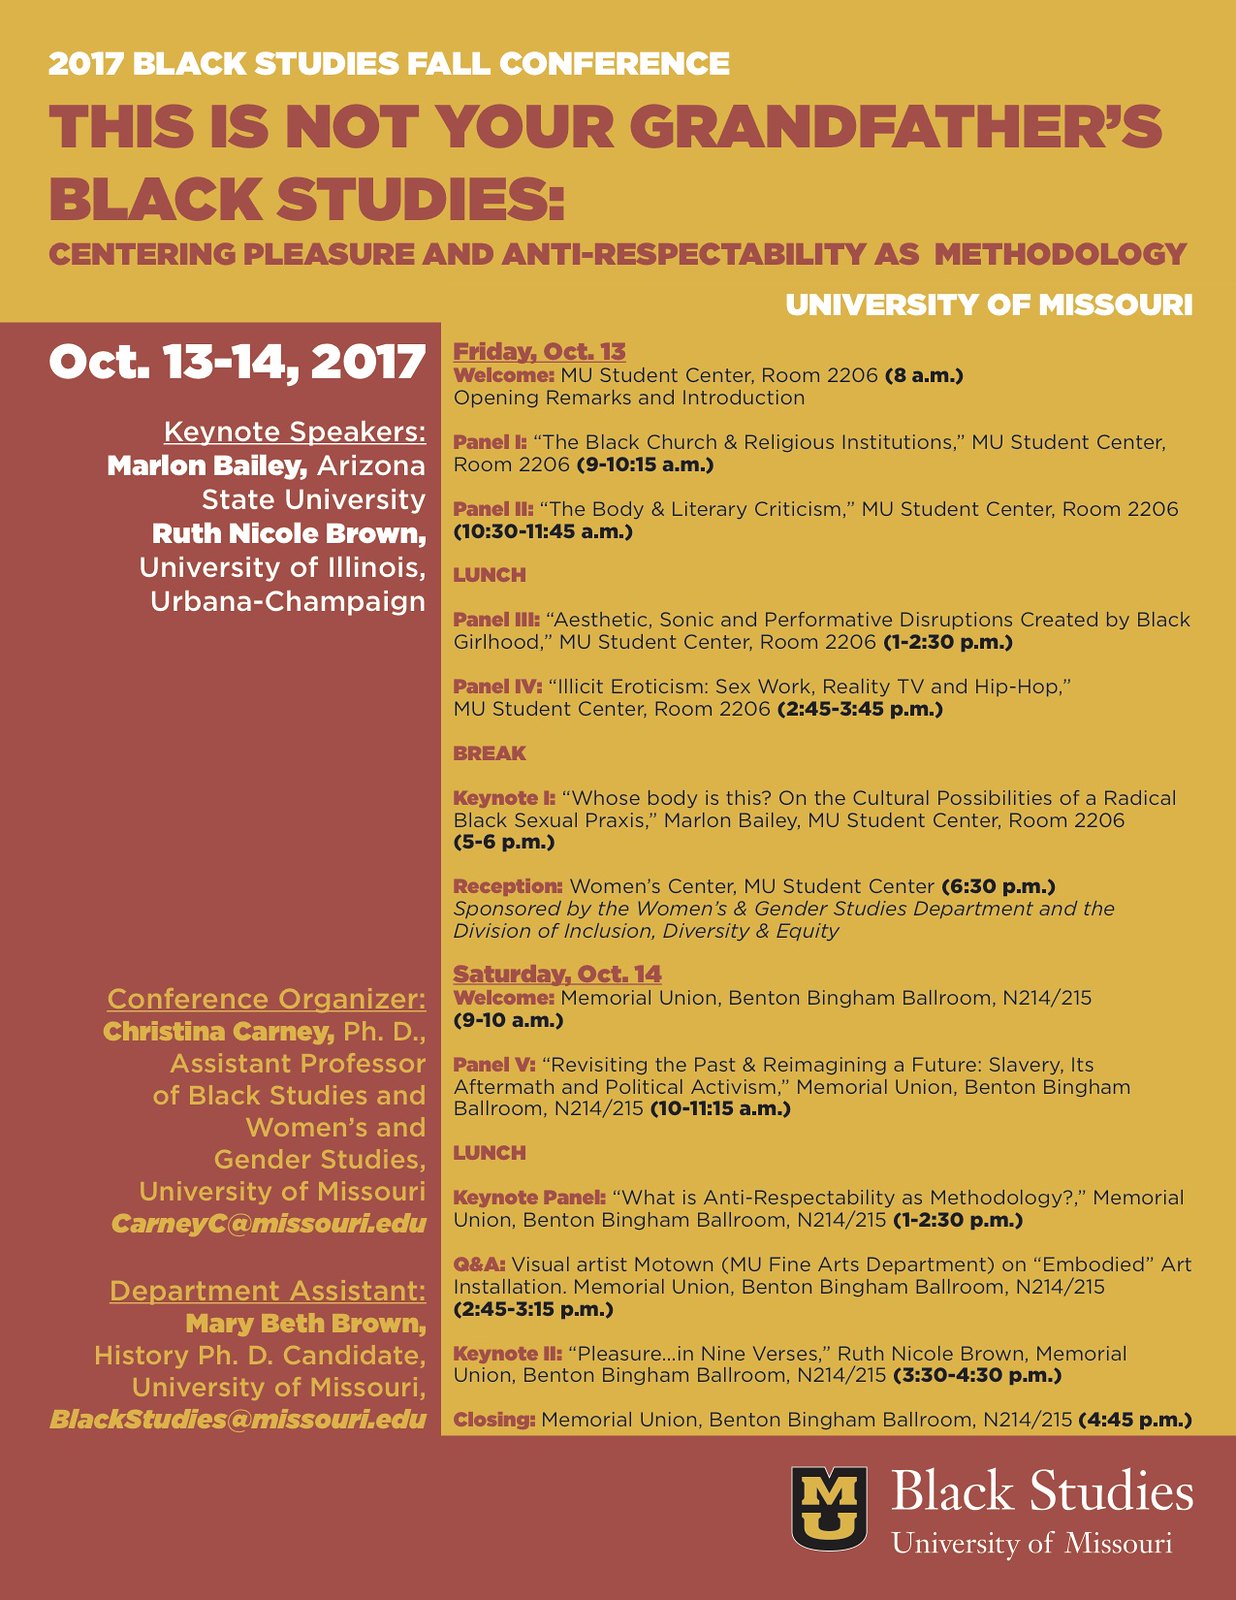 Poster for This Is Not Your Grandfather's Black Studies Fall Conference at the University of Missouri in Columbia